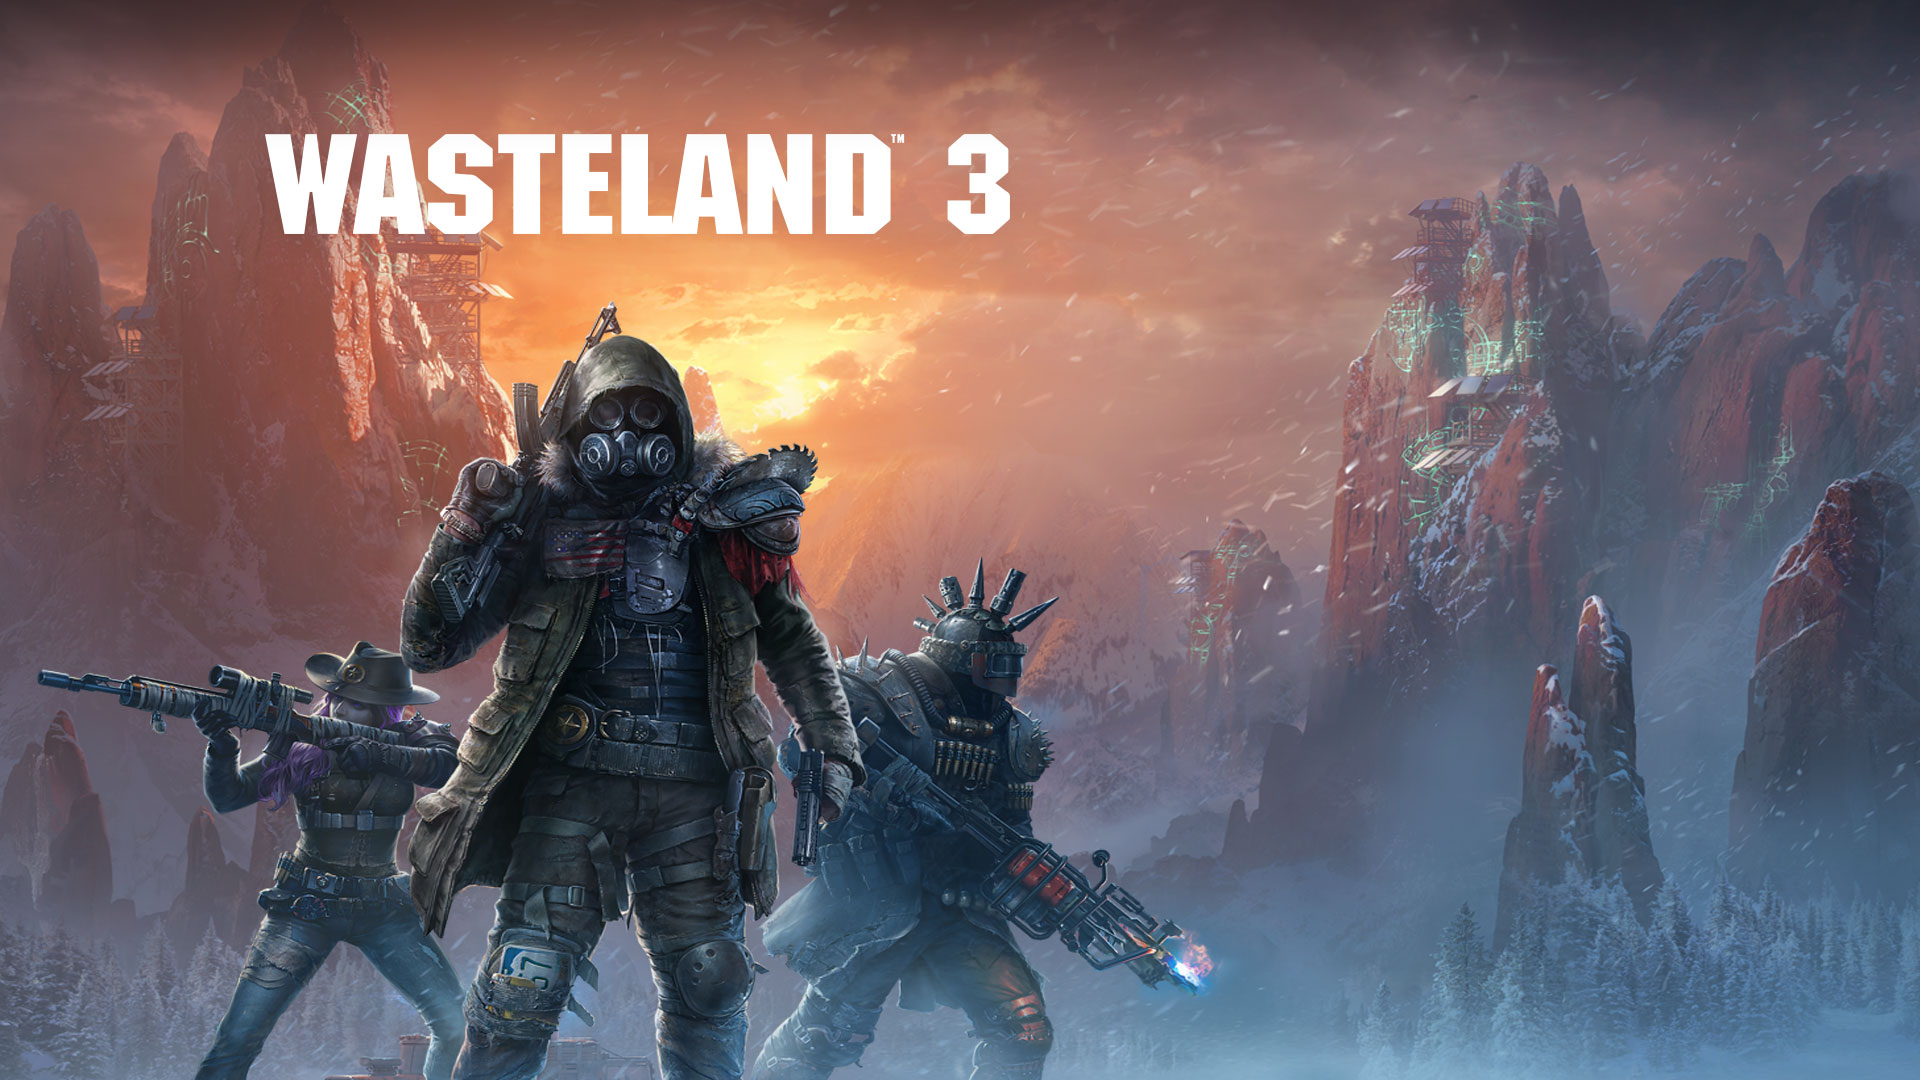 Play Wasteland 3 with Xbox Game Pass